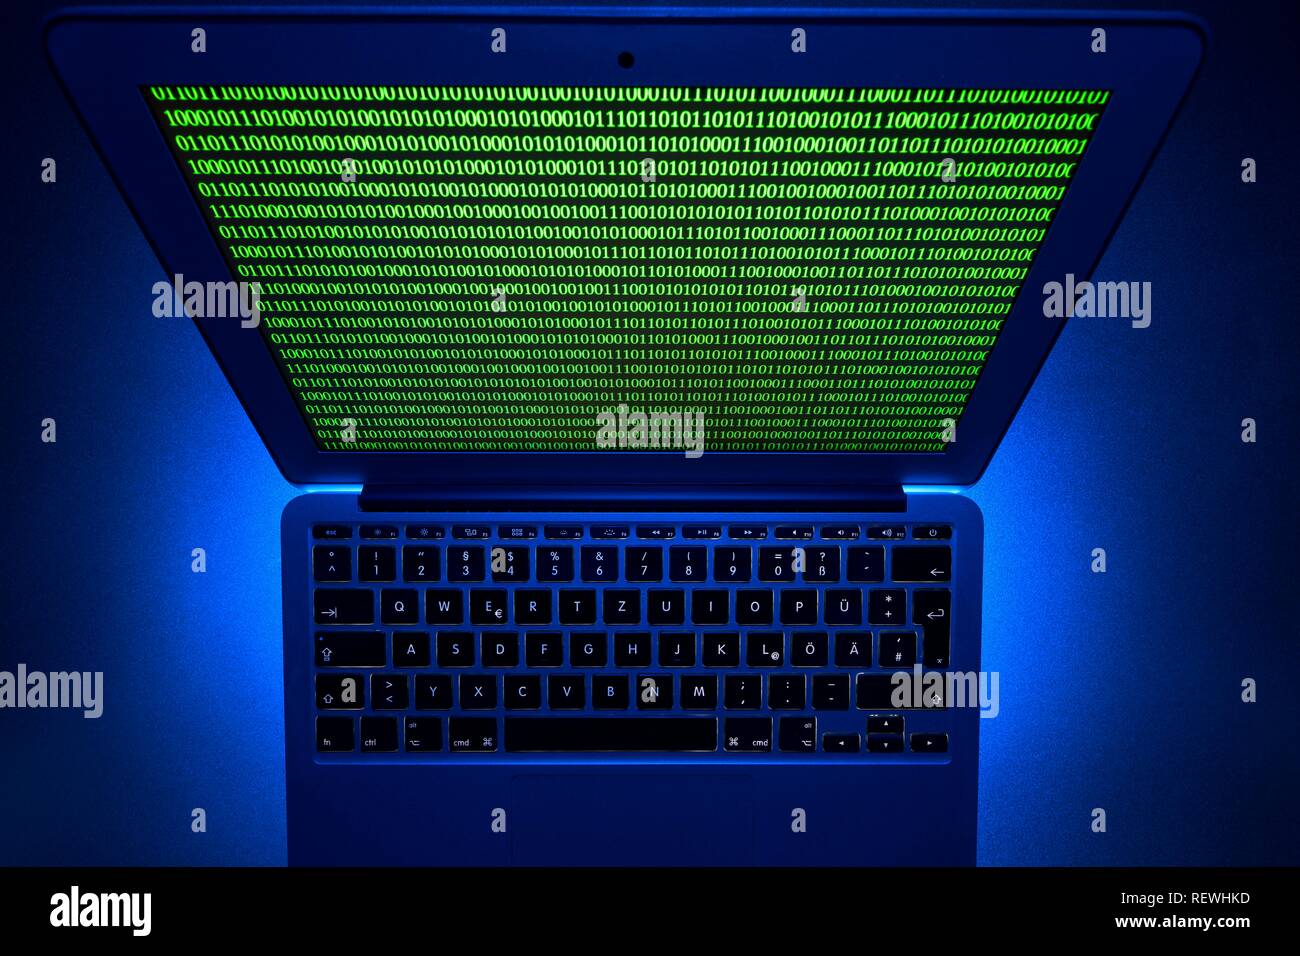 Symbol Image Cybercrime, Computer Crime, Data Protection, Baden-Württemberg, Germany Stock Photo